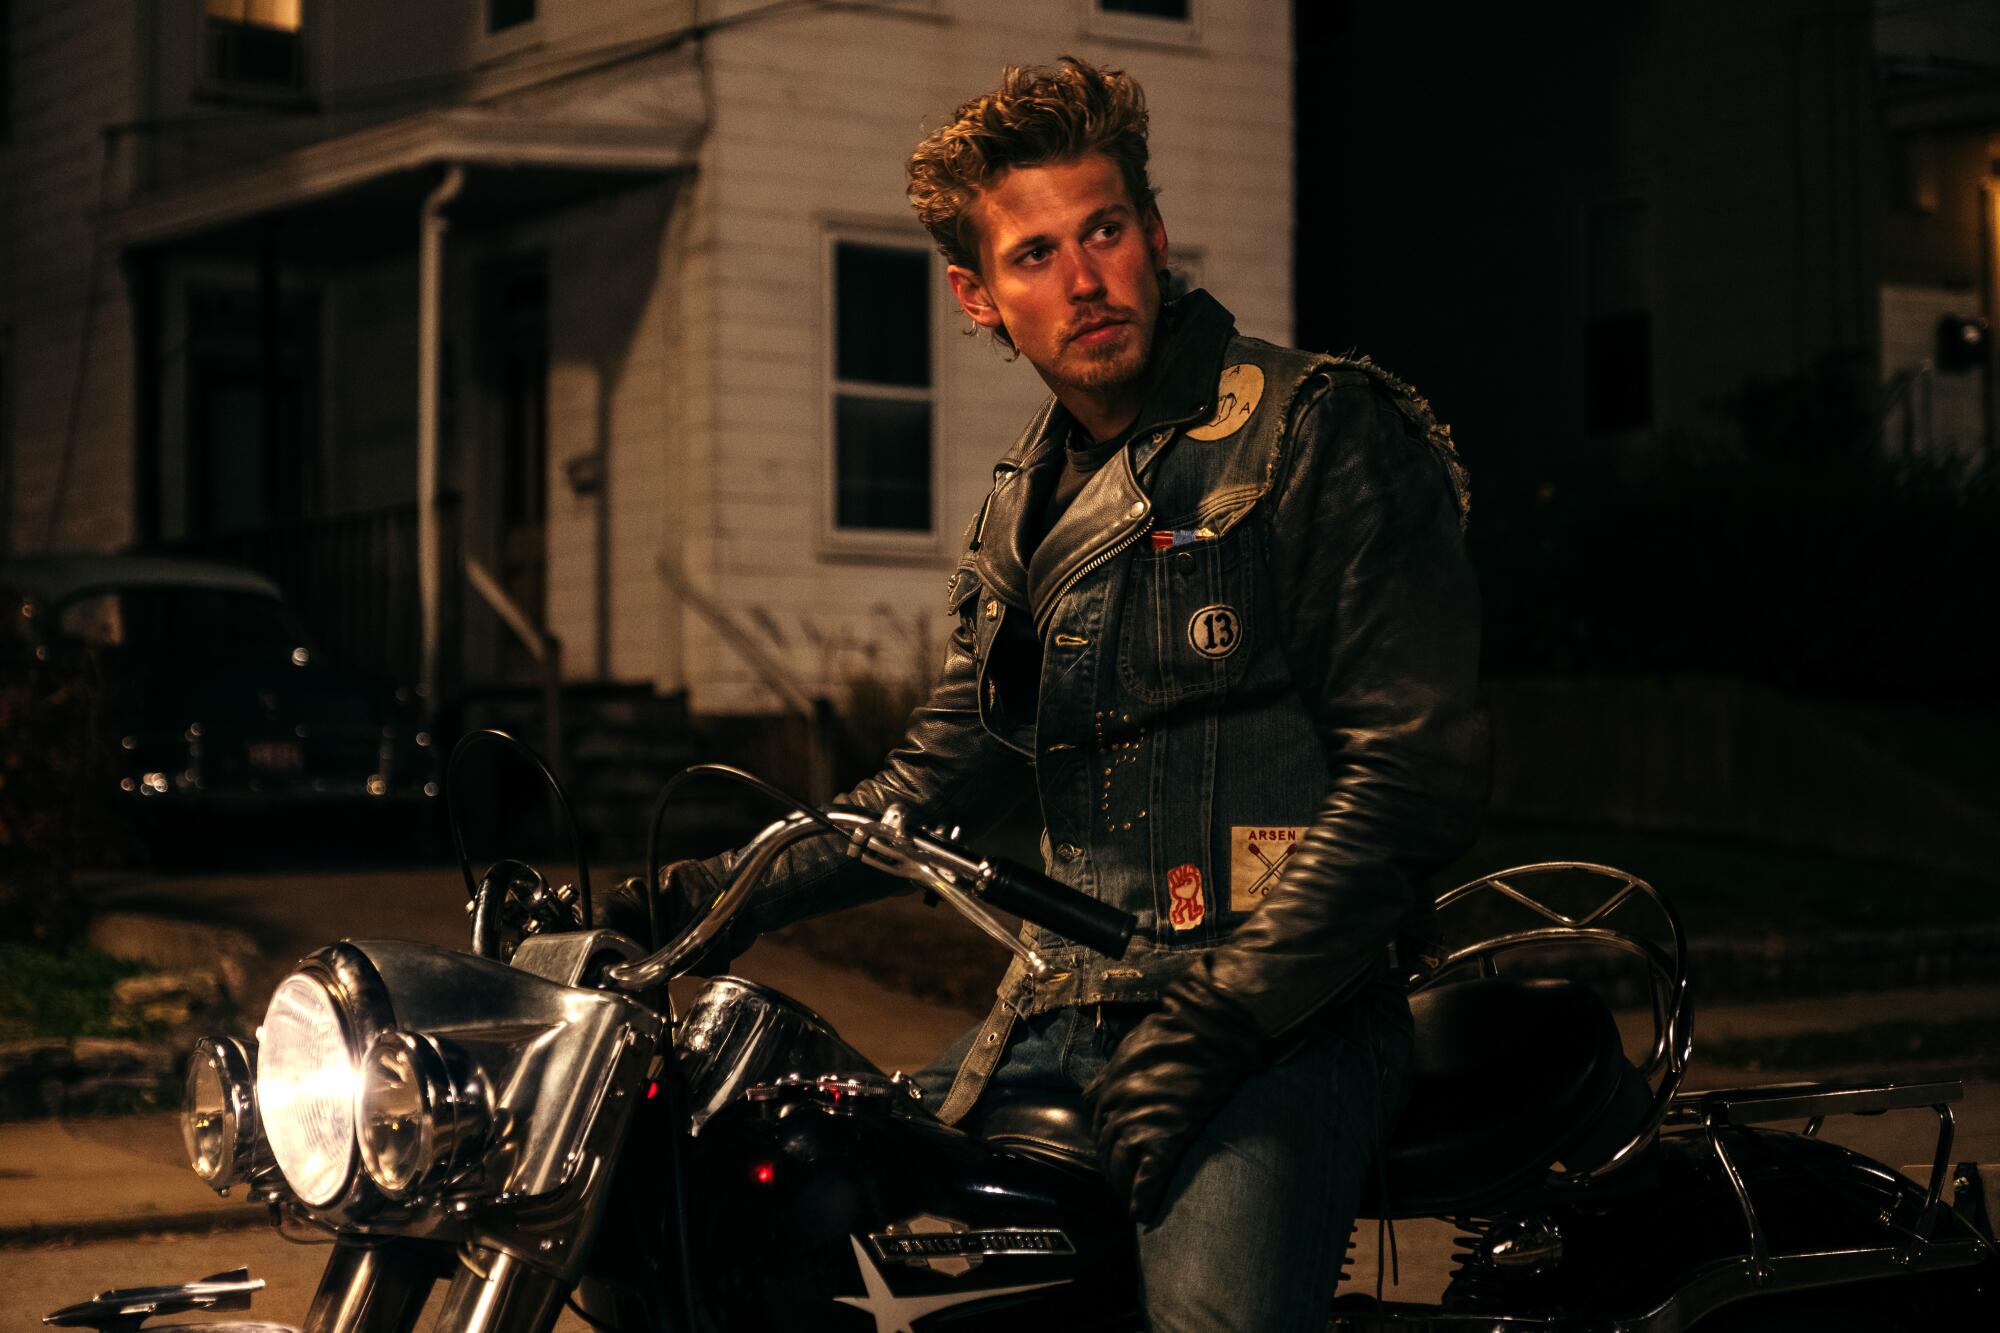 A man in a leather jacket sits on a motorcycle.